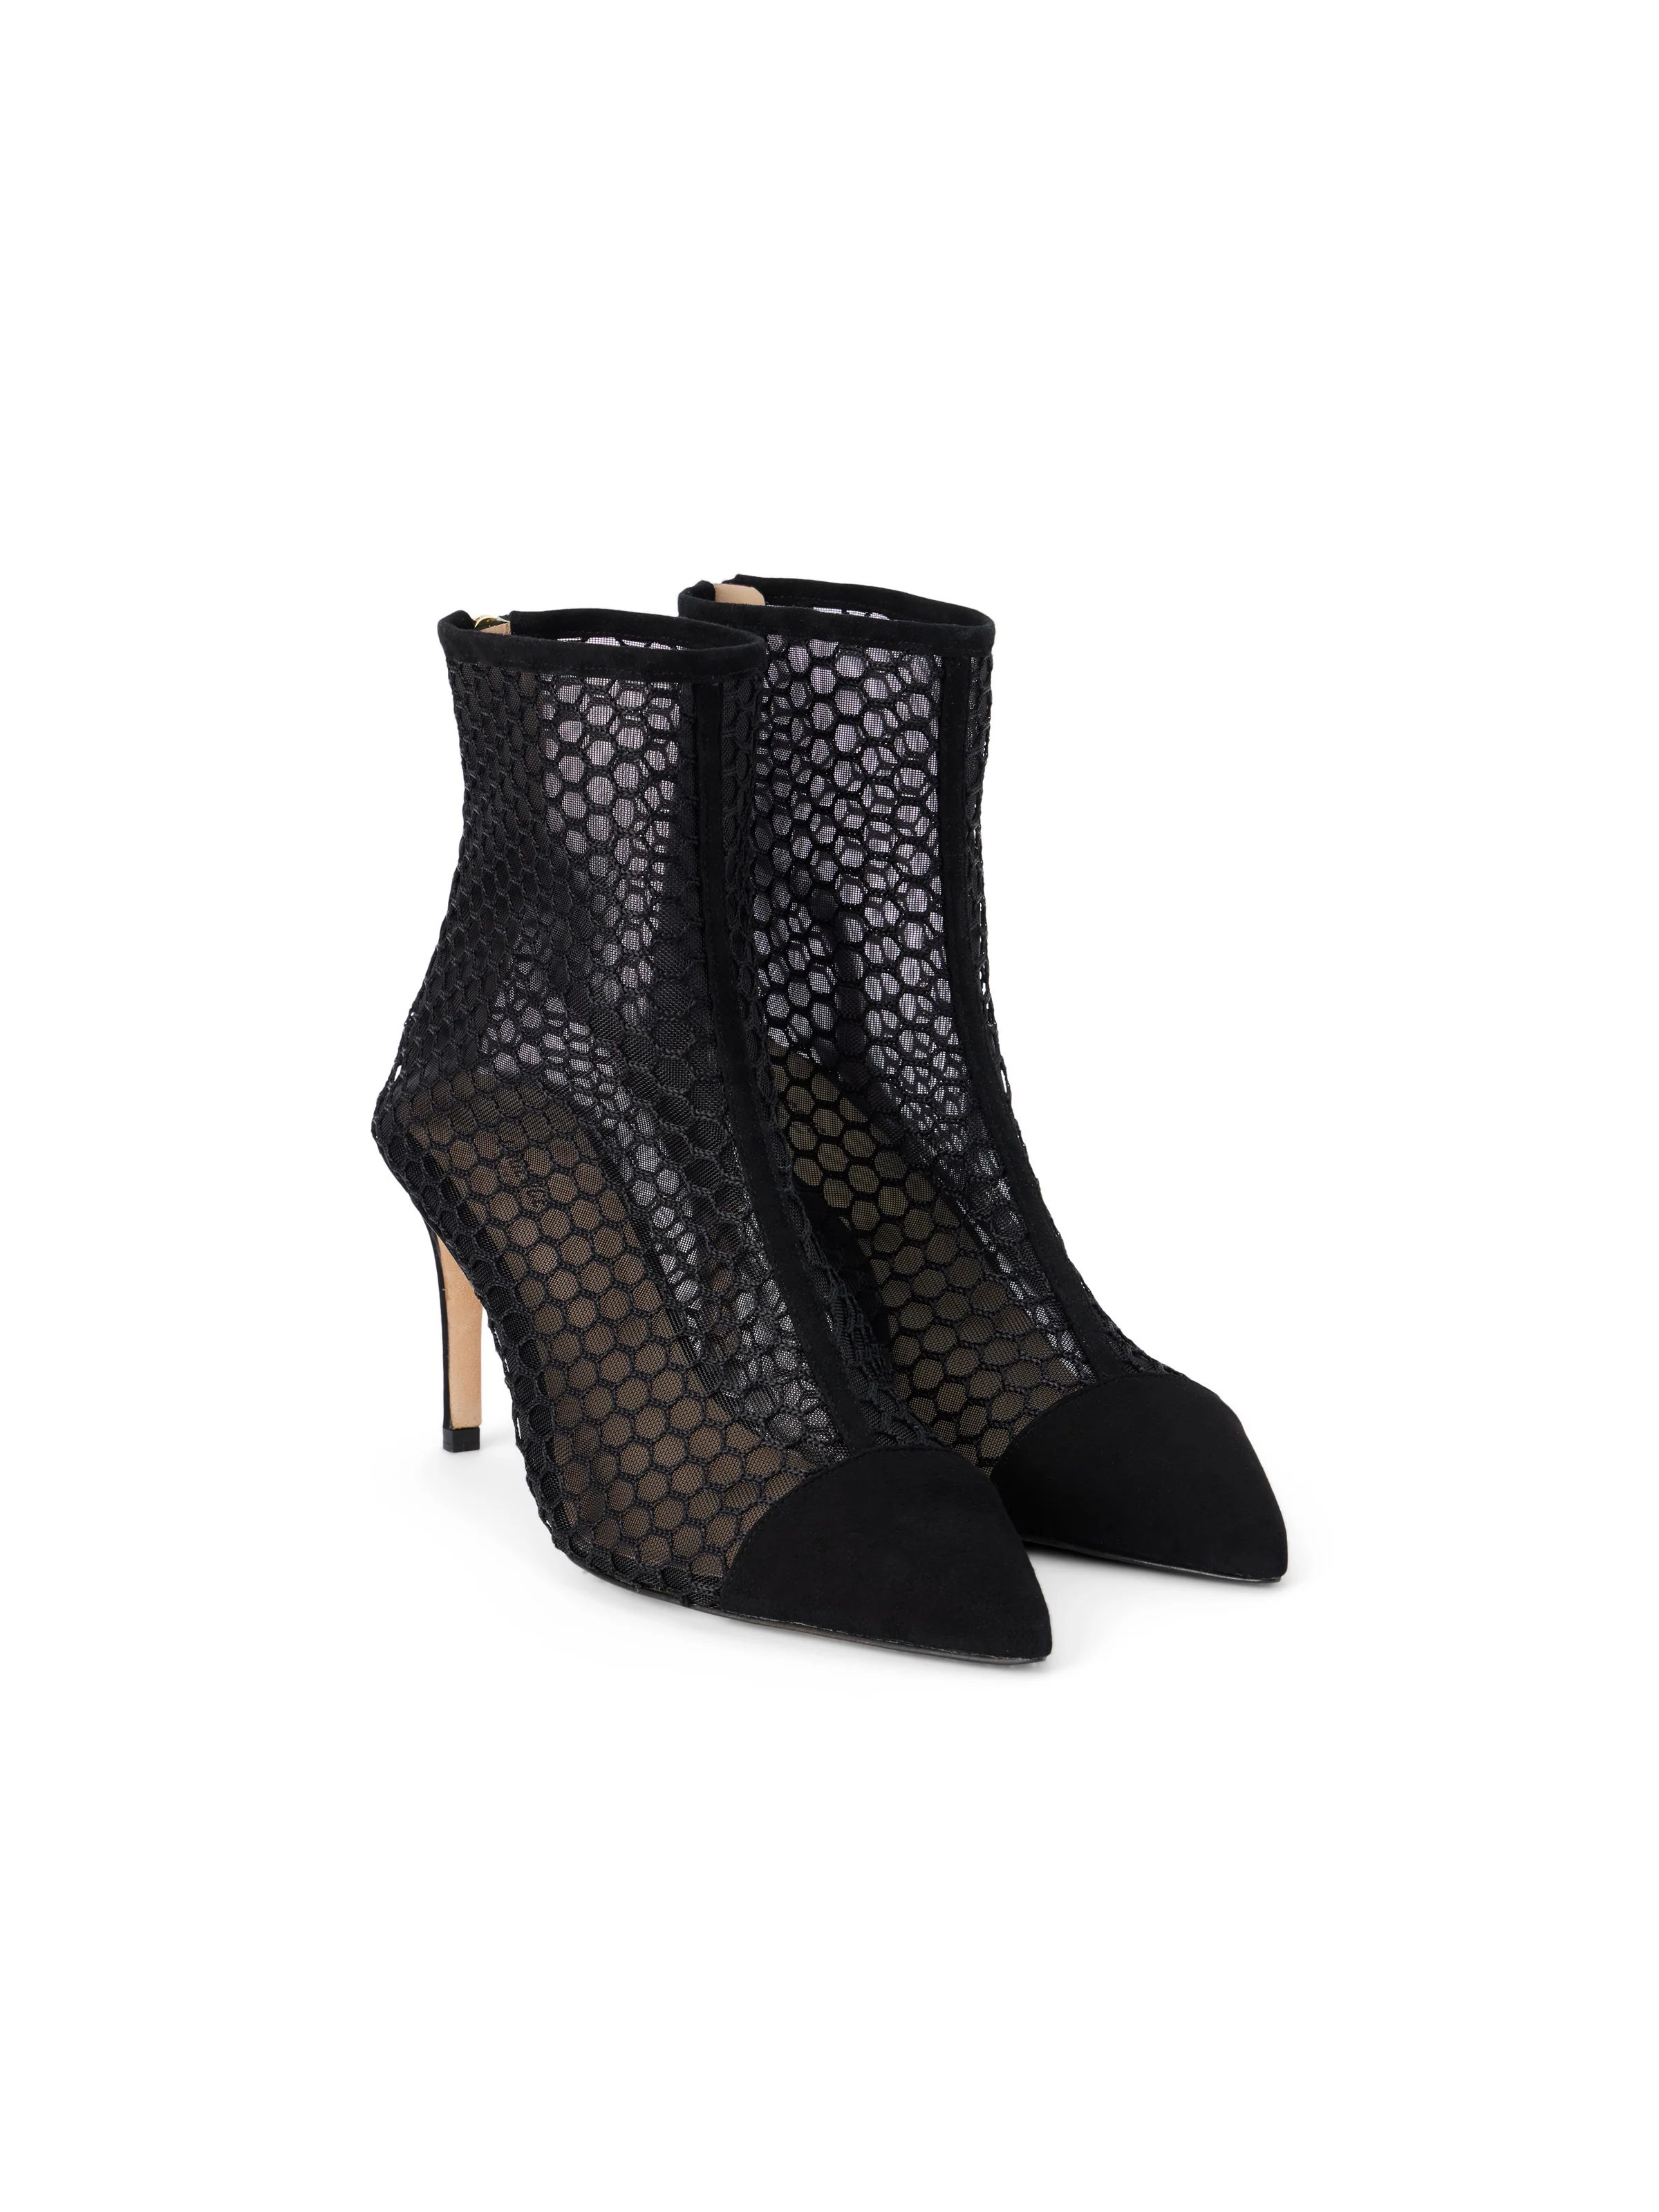 L'AGENCE Cerise Bootie in Black Suede/Mesh | L'Agence